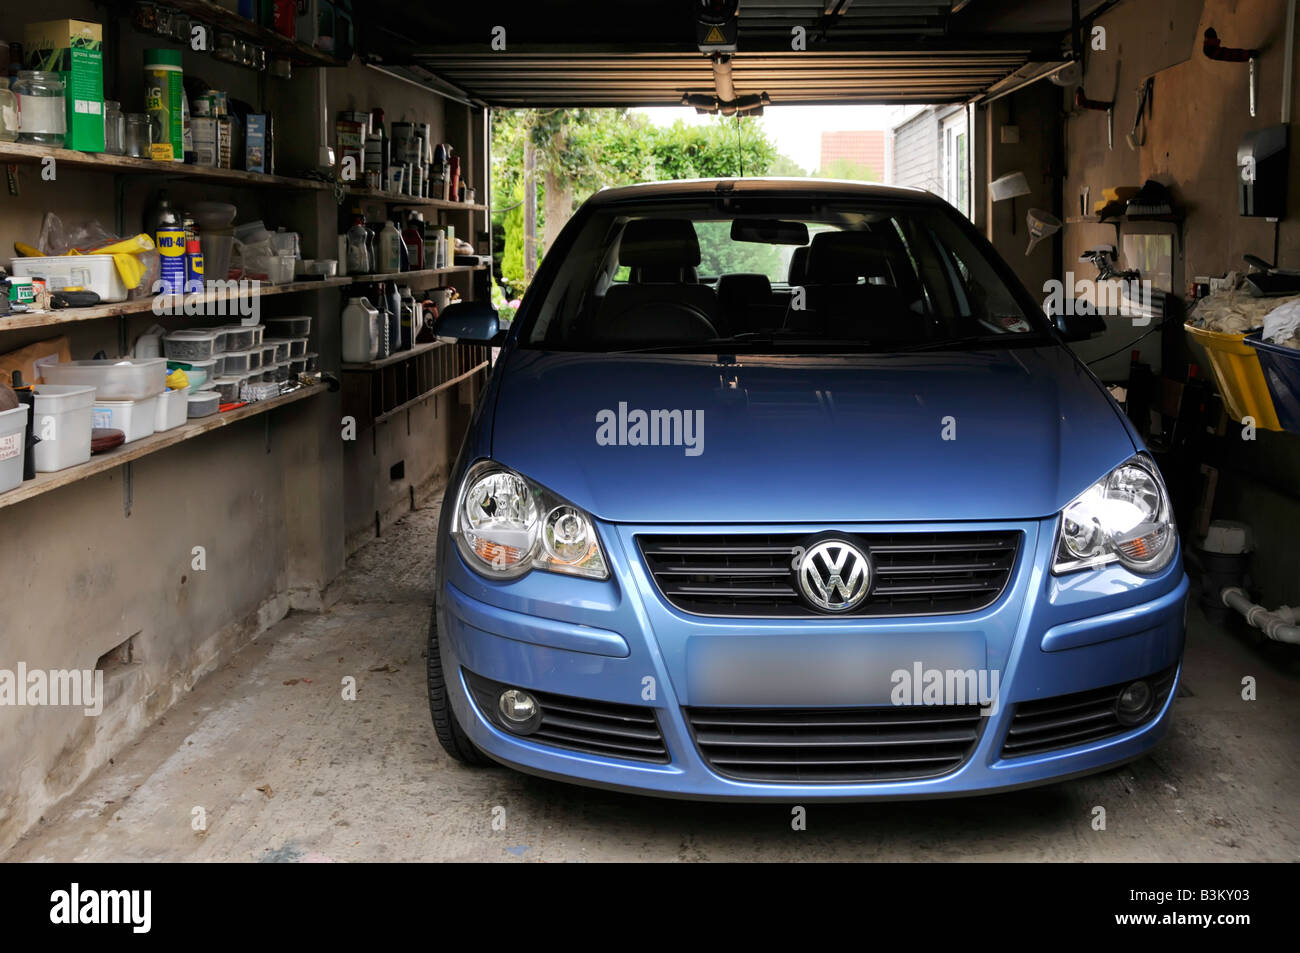 Volkswagen Polo car parked in attached house residential property garage shelving for storage of sundry household paraphernalia & tools England UK Stock Photo - Alamy